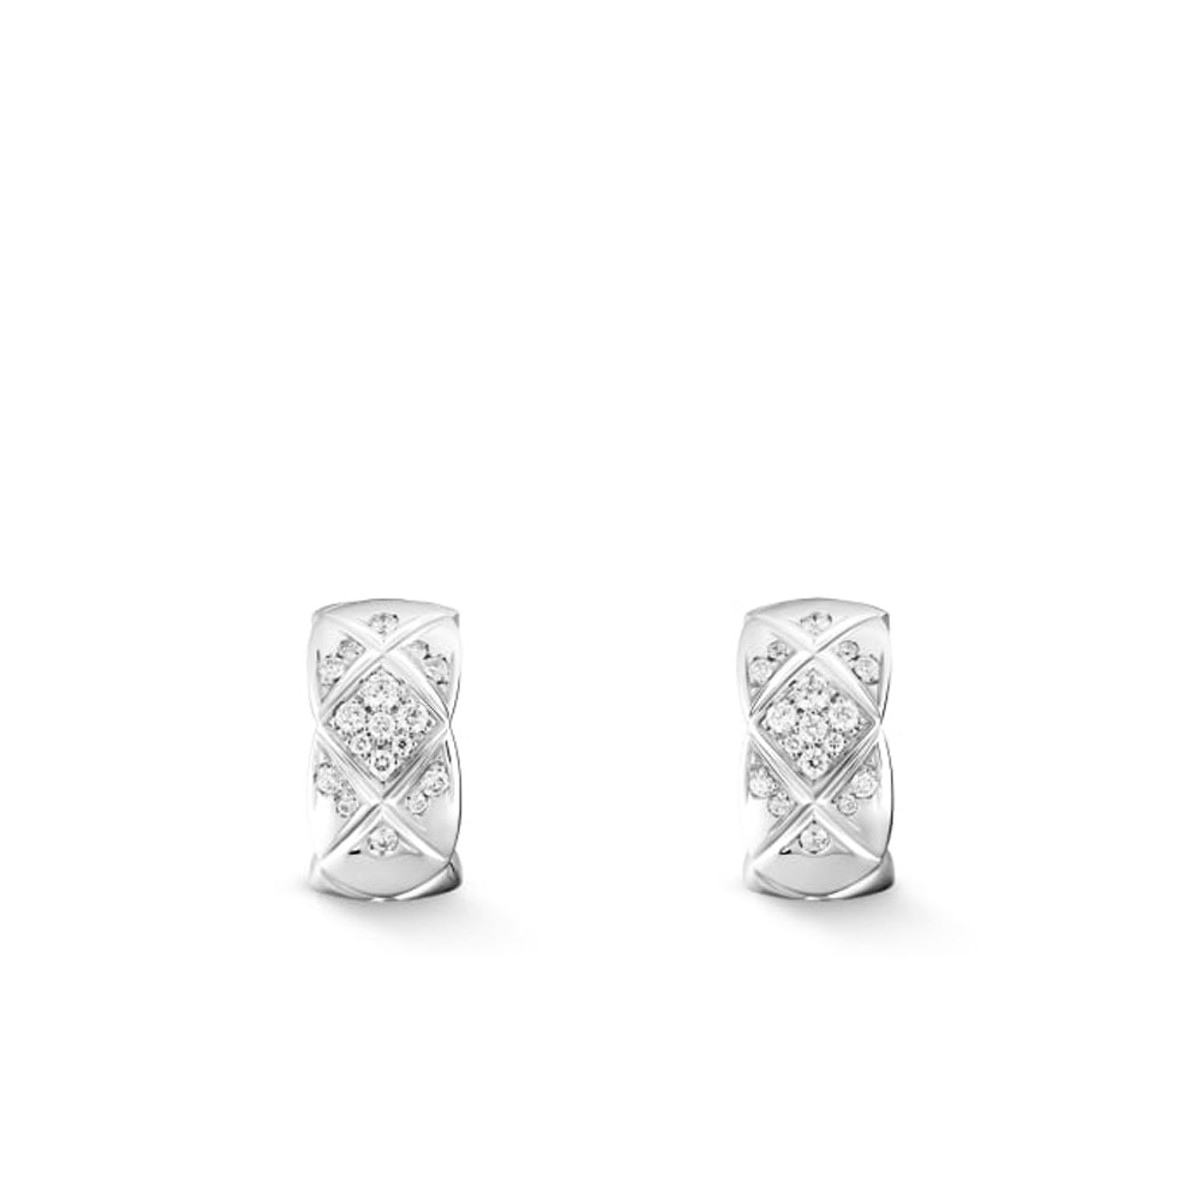 CHANEL COCO CRUSH EARRINGS-25952 Product Image